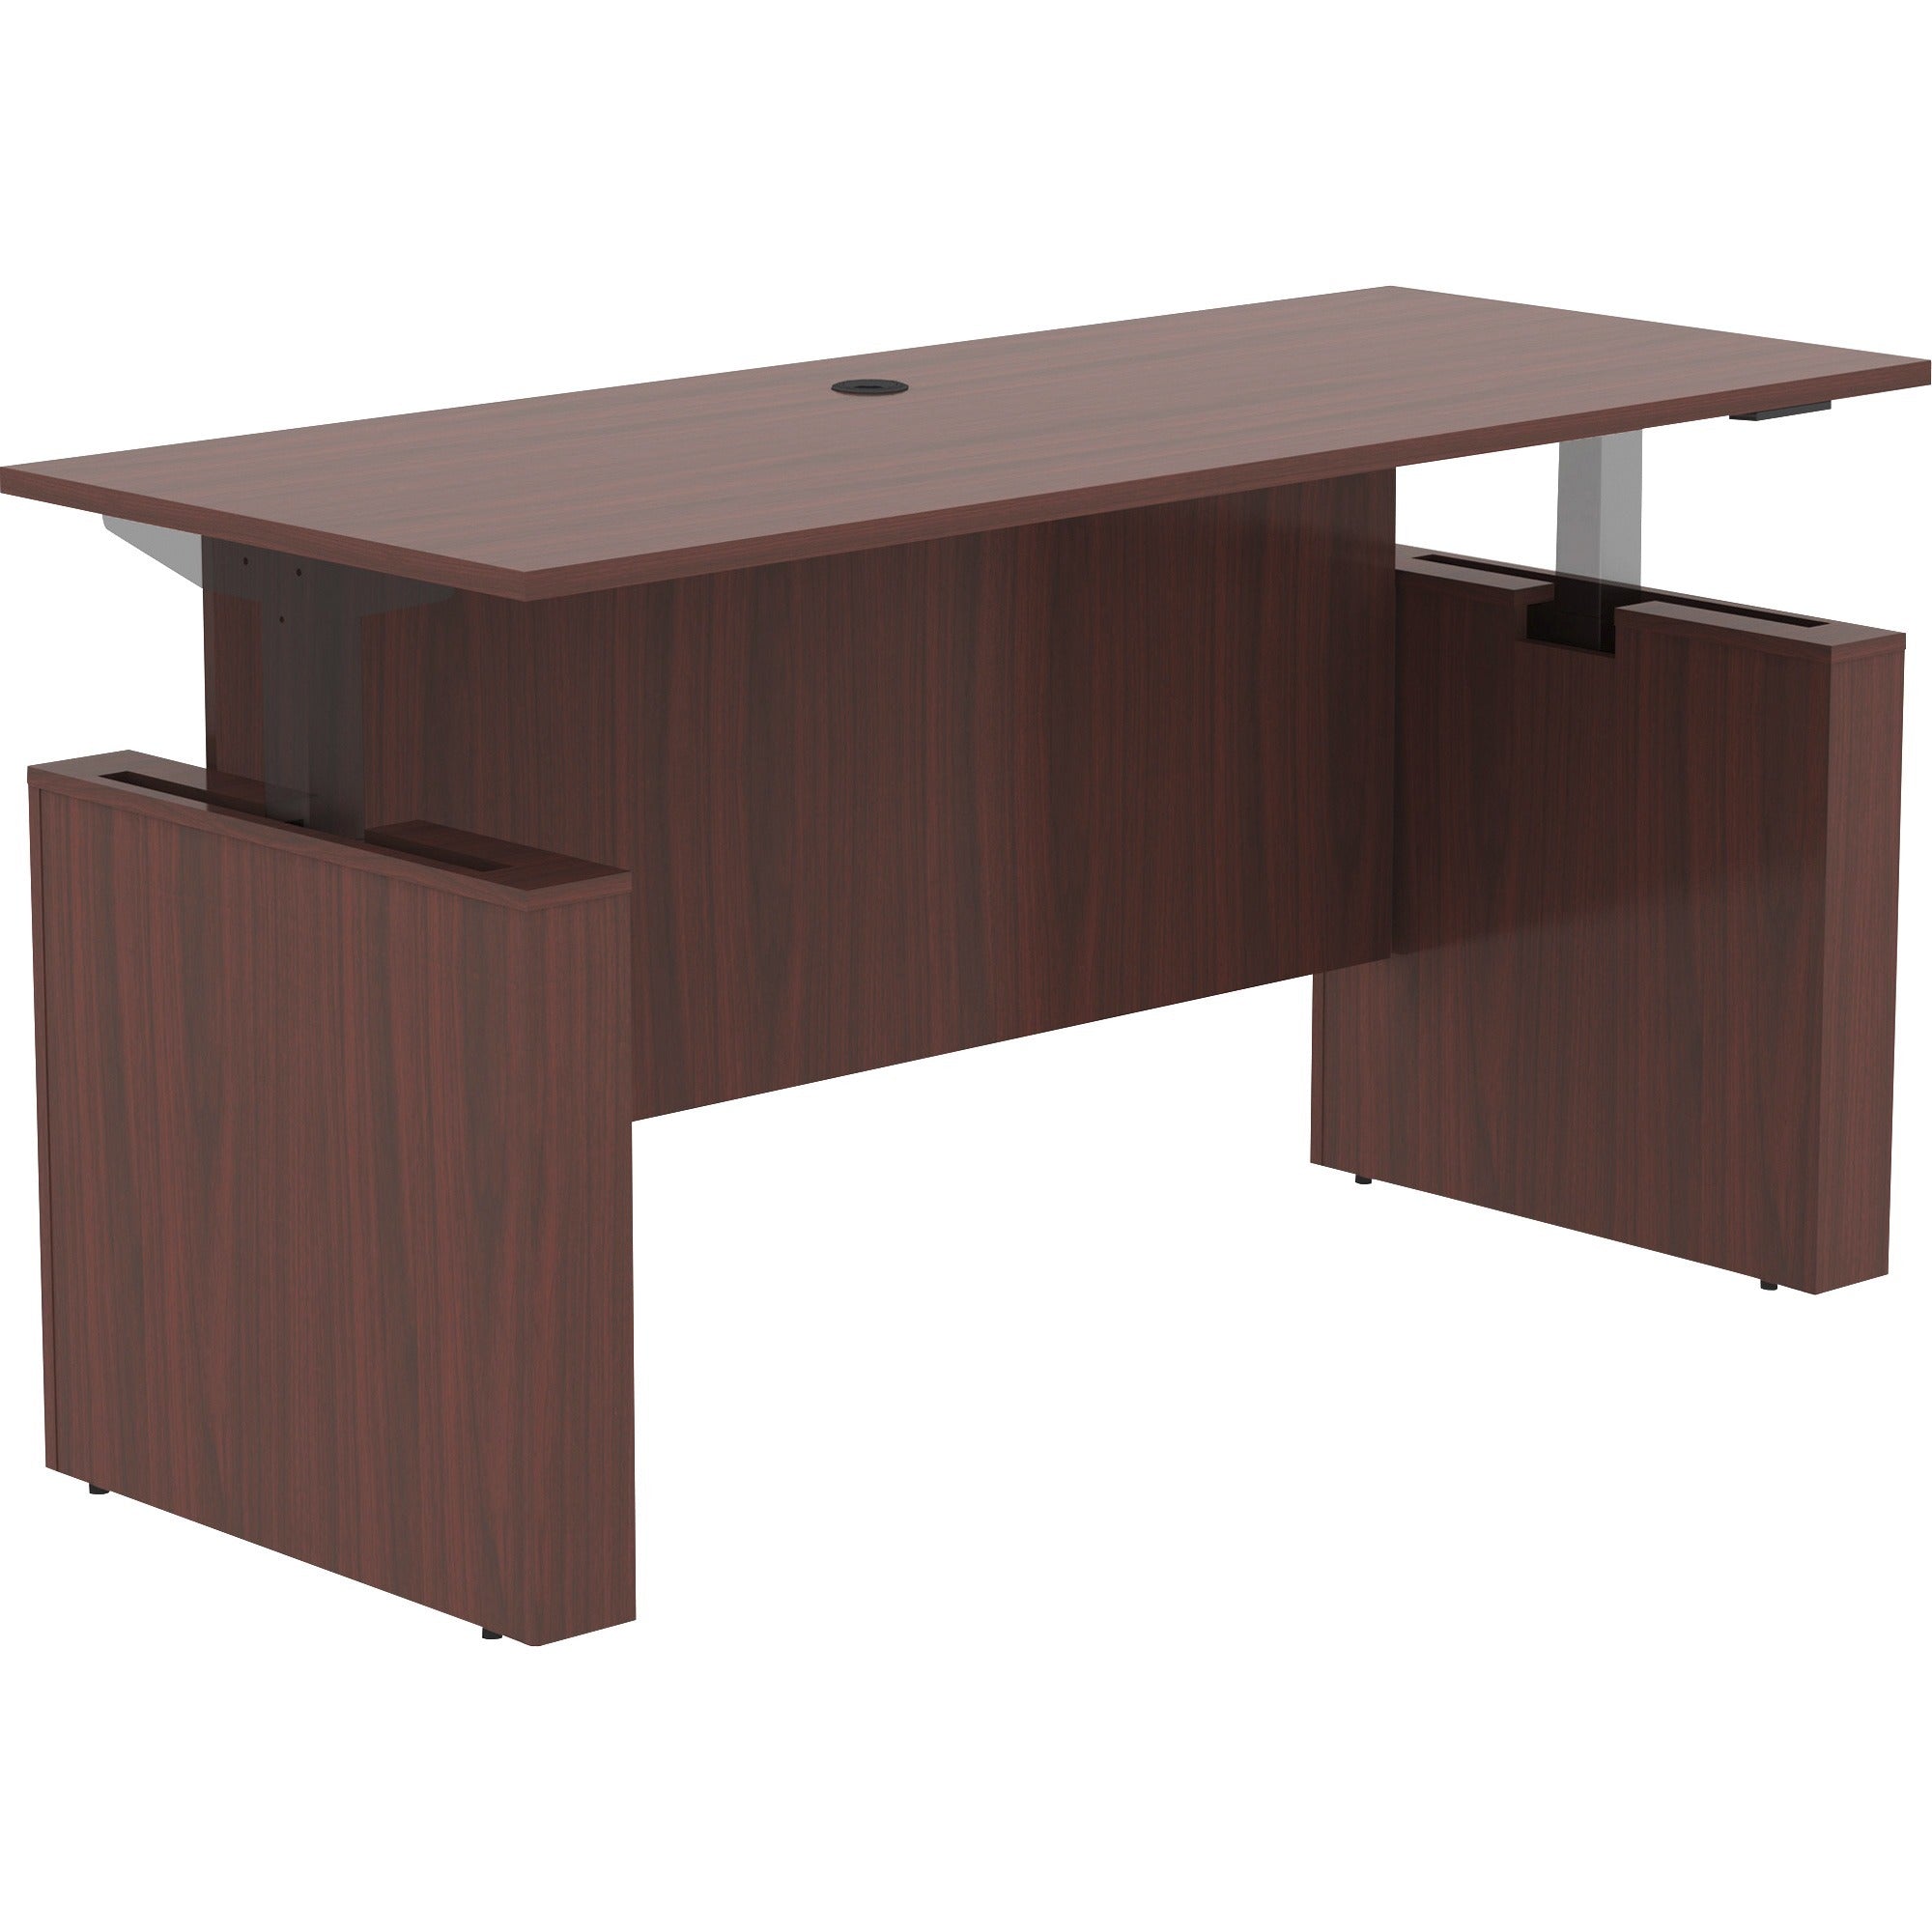 lorell-essentials-series-sit-to-stand-desk-shell-01-top-1-edge-72-x-2949-finish-mahogany-laminate-table-top_llr69574 - 1